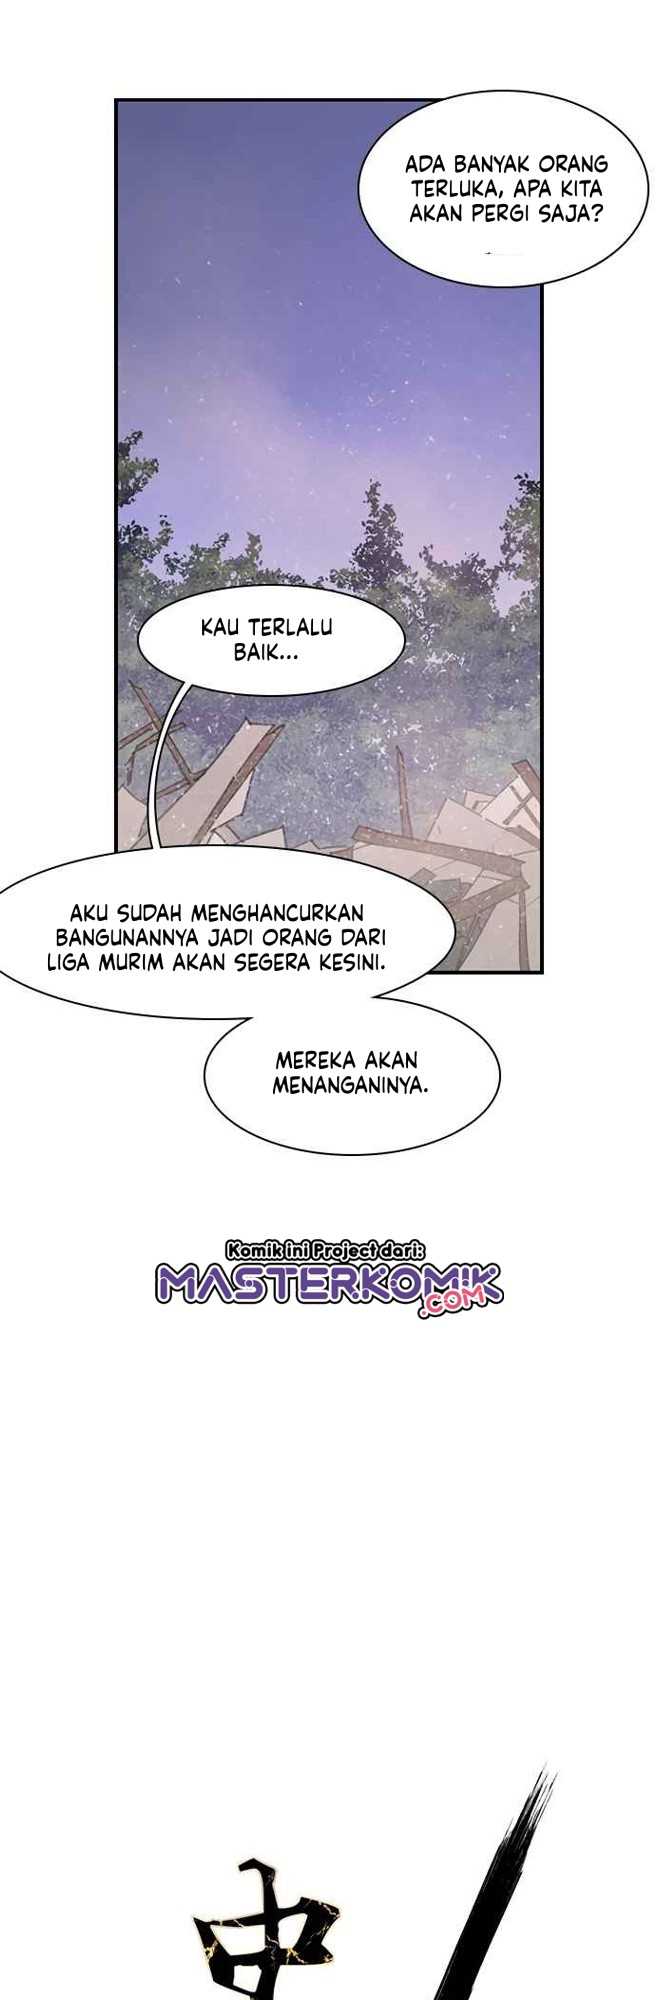 The Strongest Ever Chapter 47